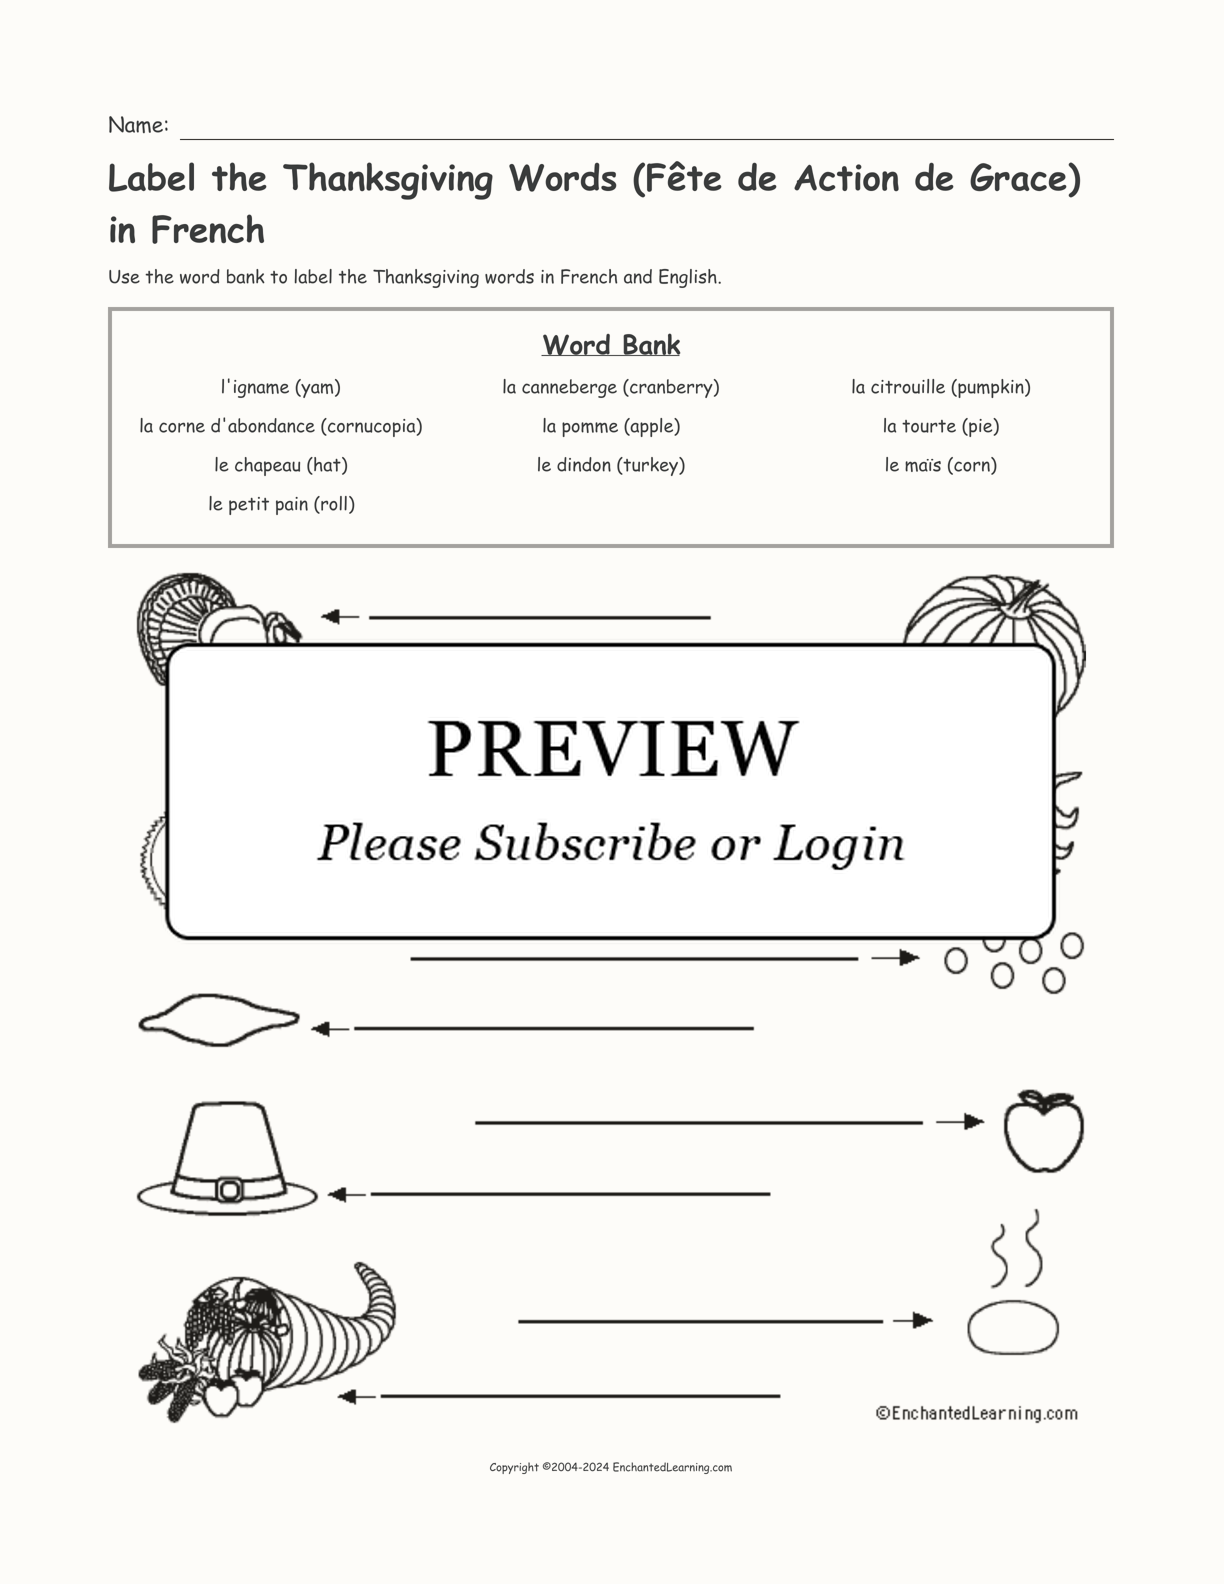 Label the Thanksgiving Words (Fête de Action de Grace) in French interactive worksheet page 1